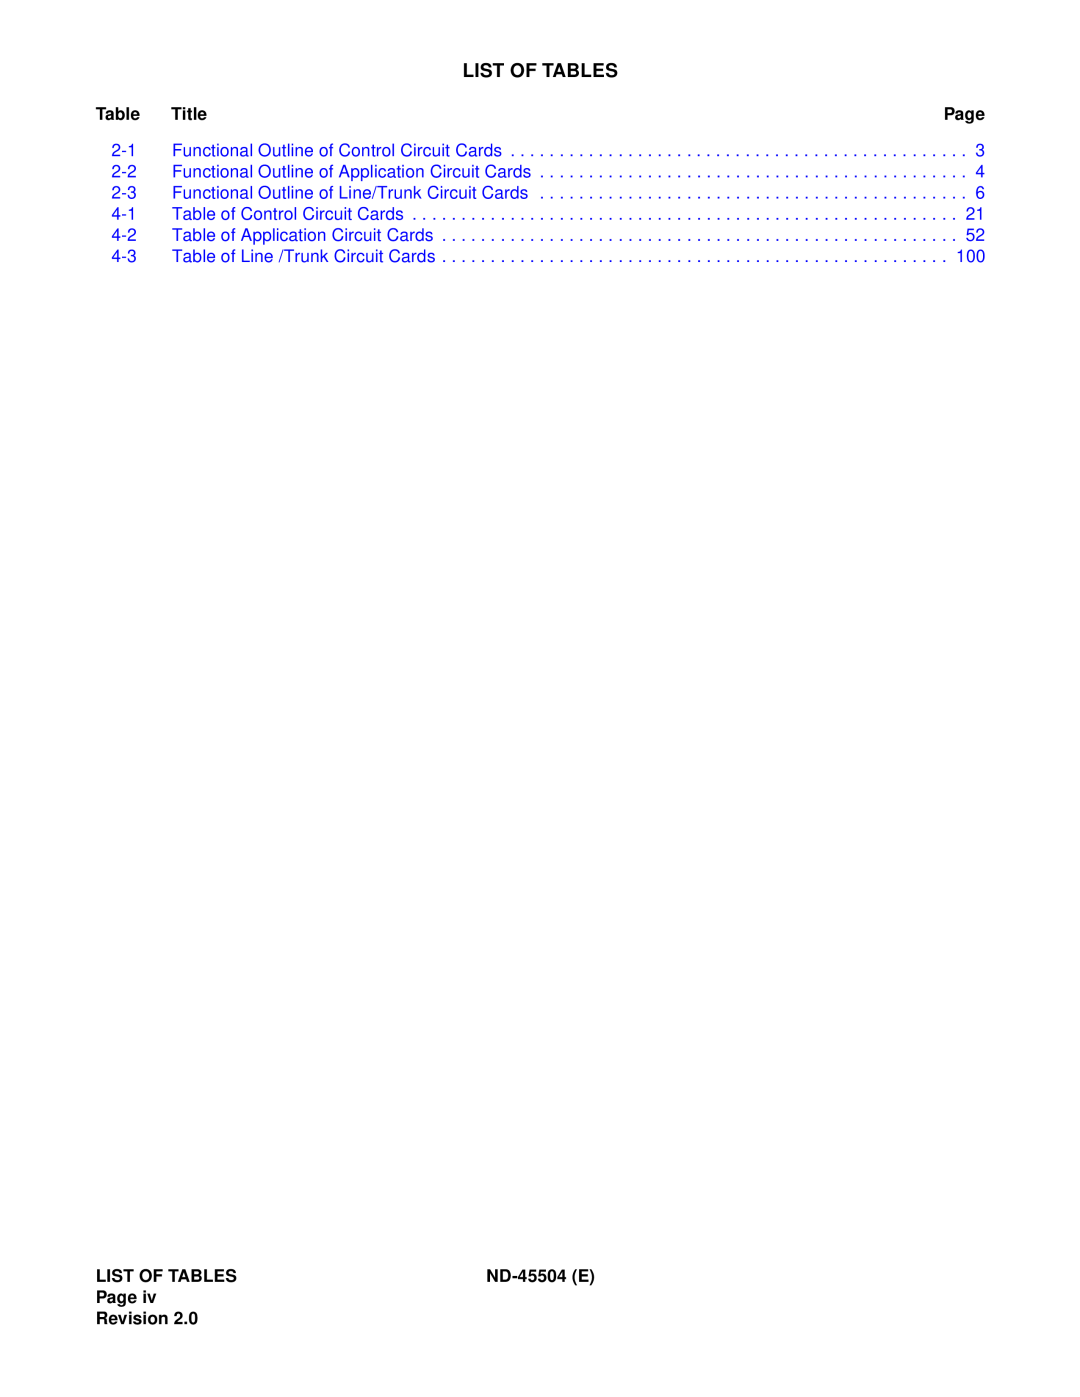 NEC 2000 IVS manual List Of Tables, Table Title, ND-45504E, Page Revision 